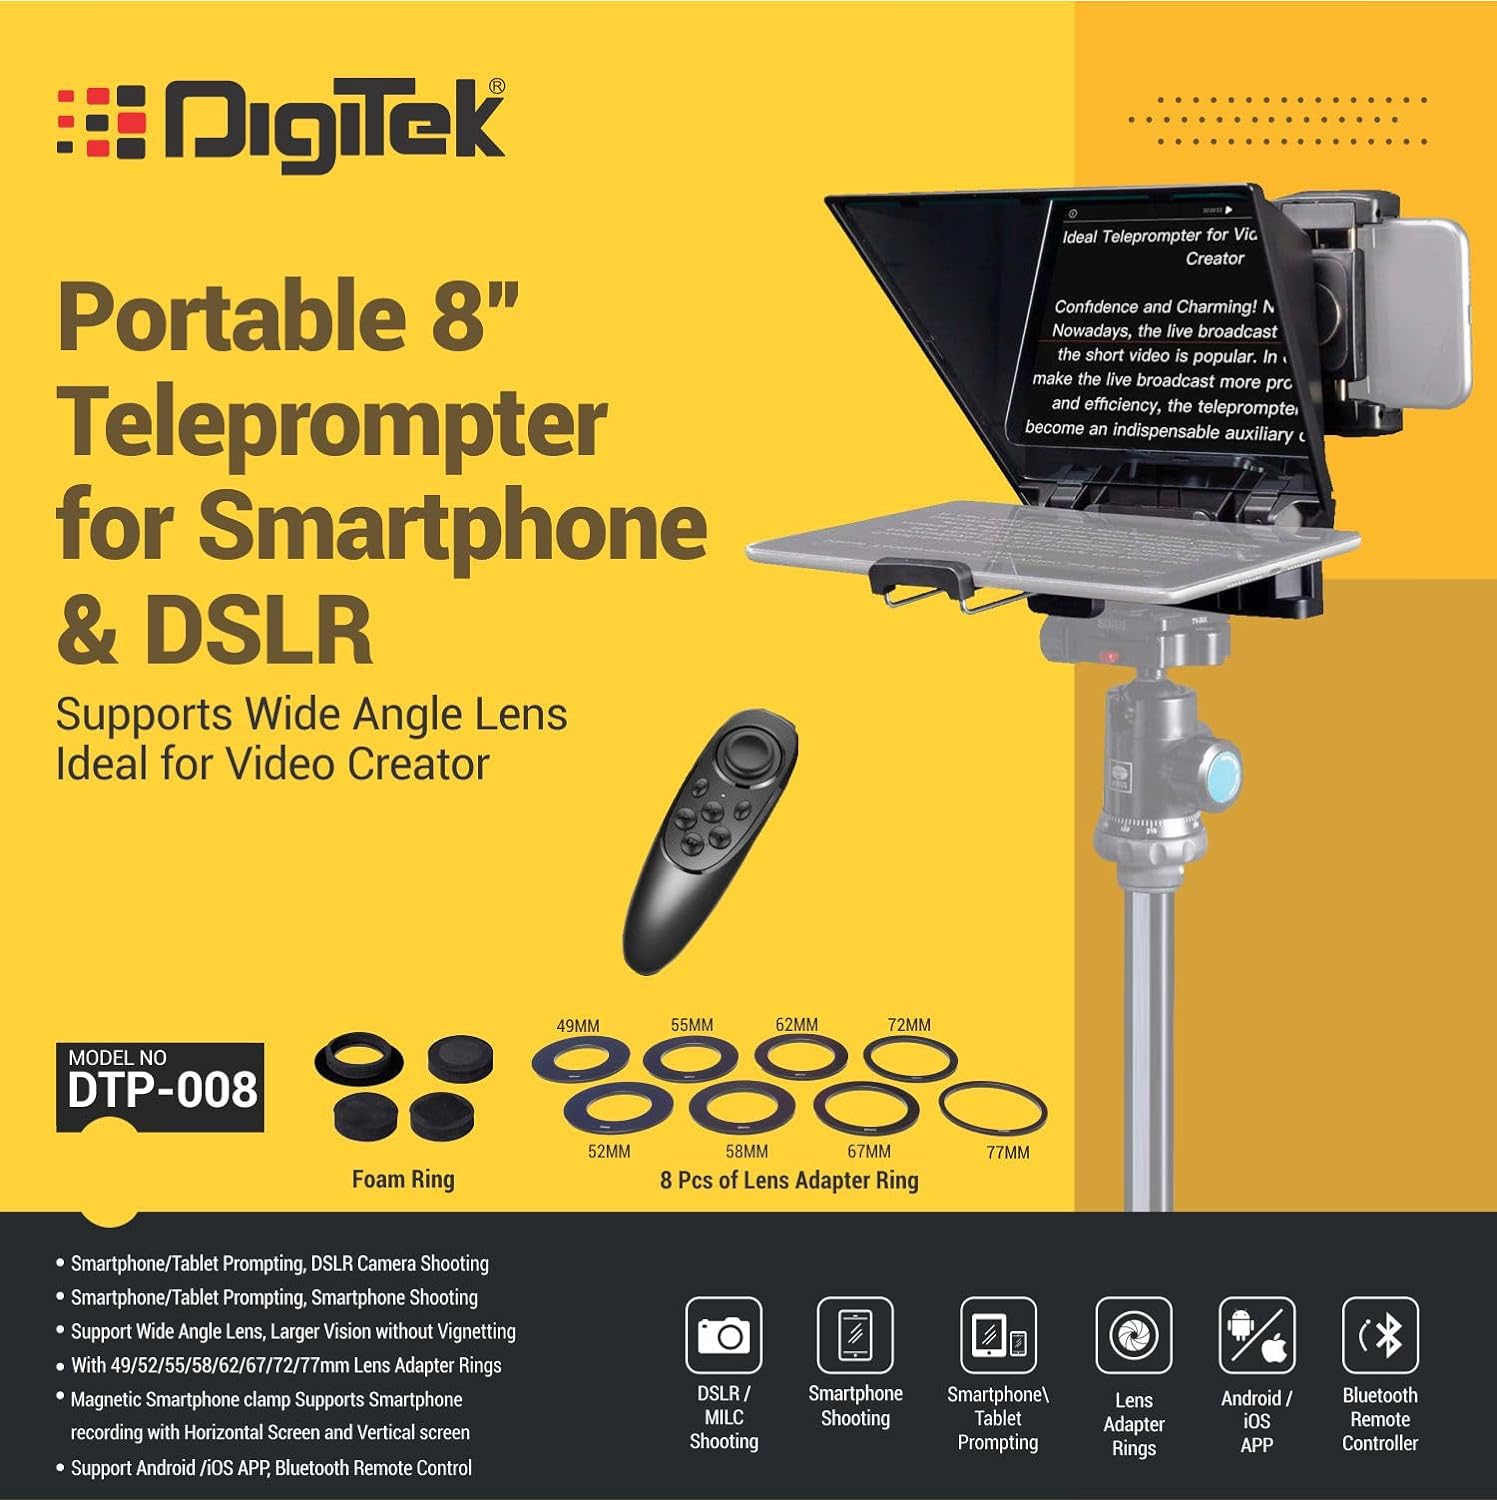 Digitek (DTP-008) 8” Digitek Teleprompter for Smartphone & DSLR Supports w/Remote Control, APP Compatible with iOS & Android System for Video Creator